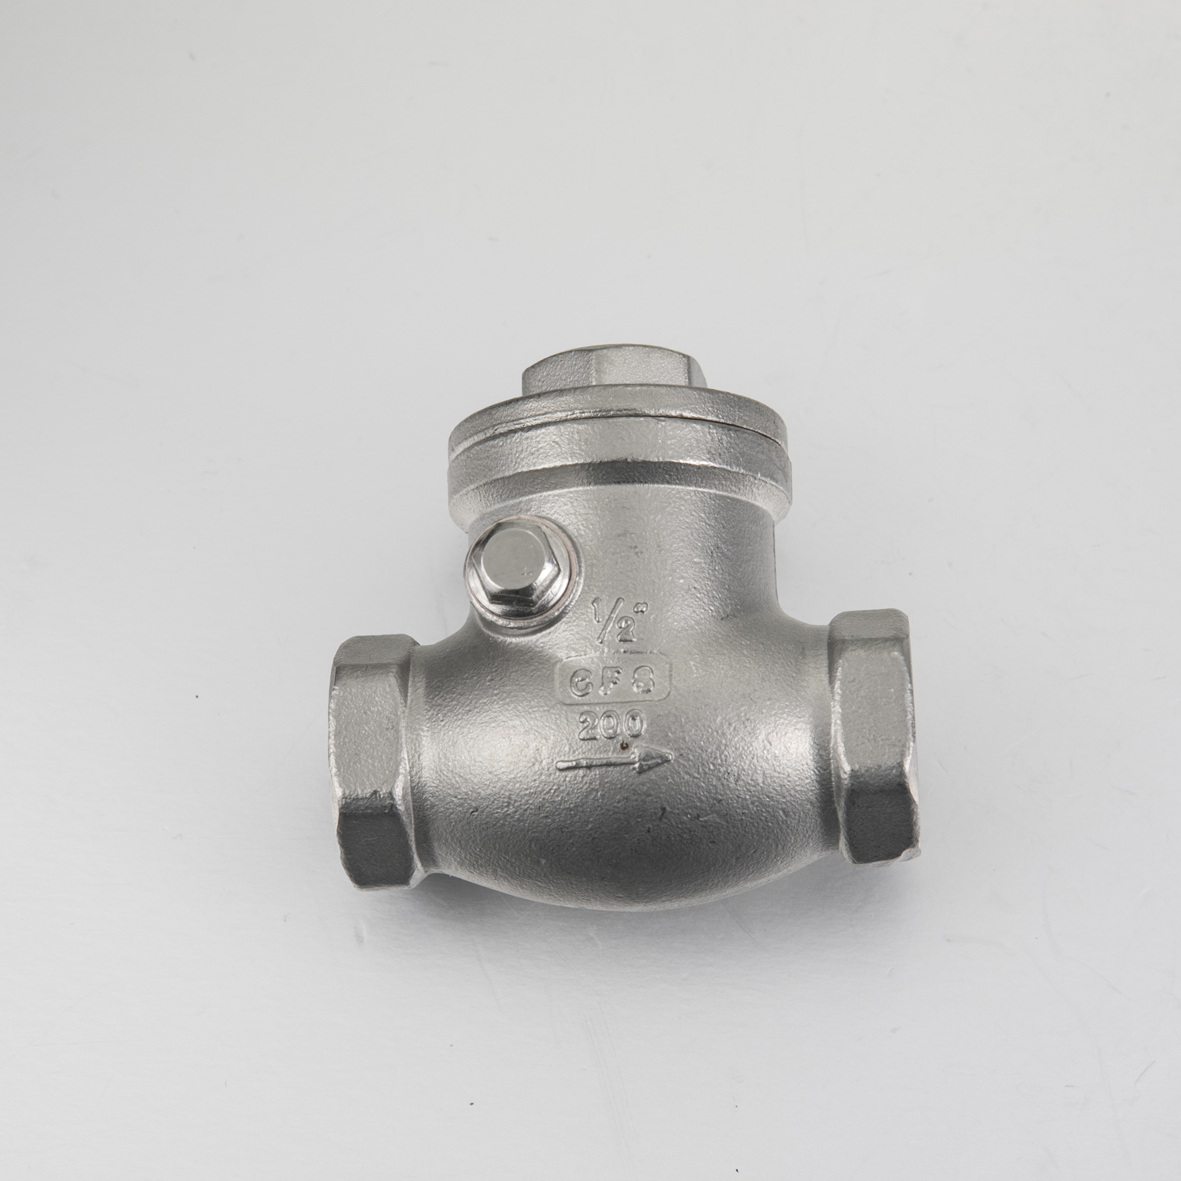 Stainless Steel 304/316 Swing Check Valve